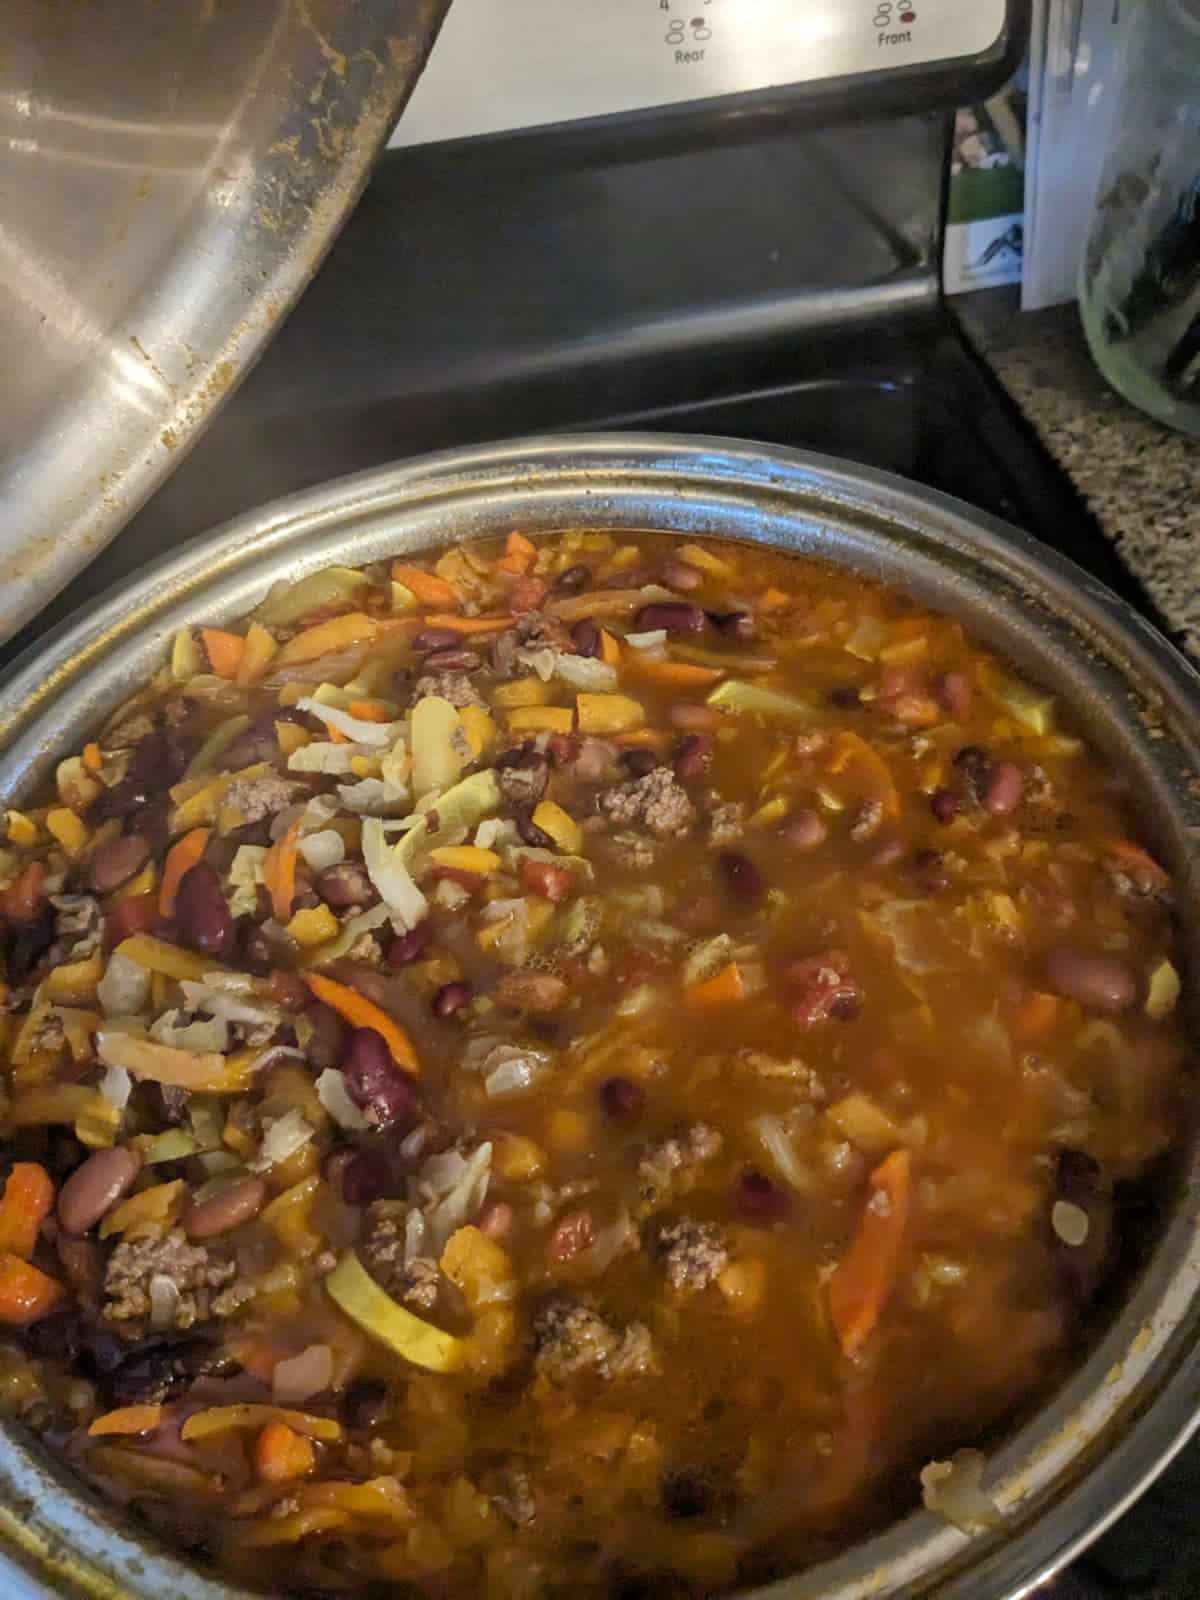 veggie loaded chili recipe - Life Changing Dinners